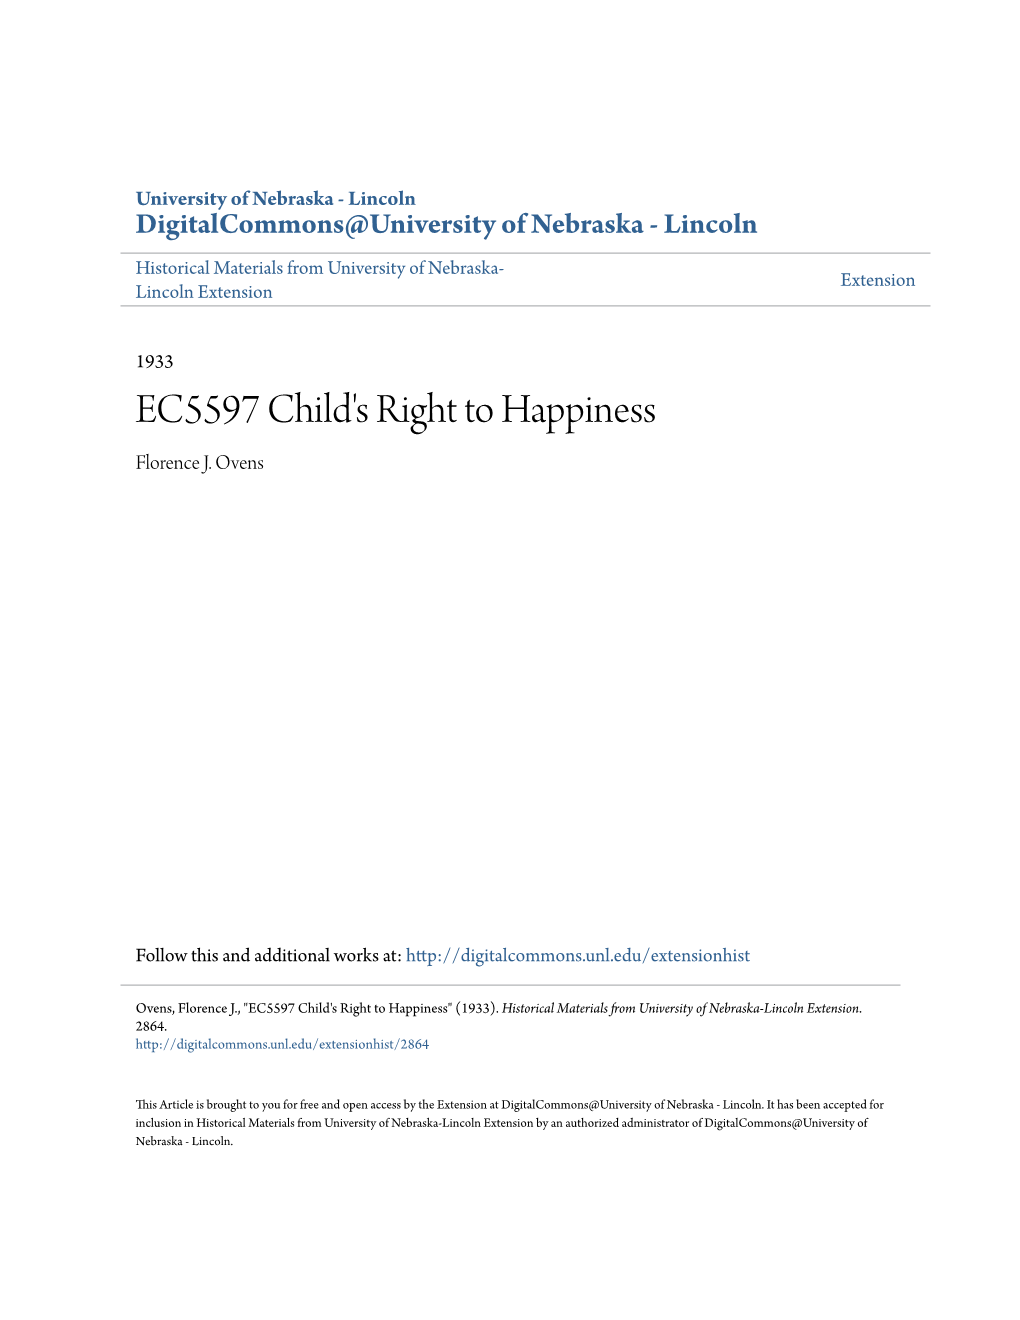 EC5597 Child's Right to Happiness Florence J